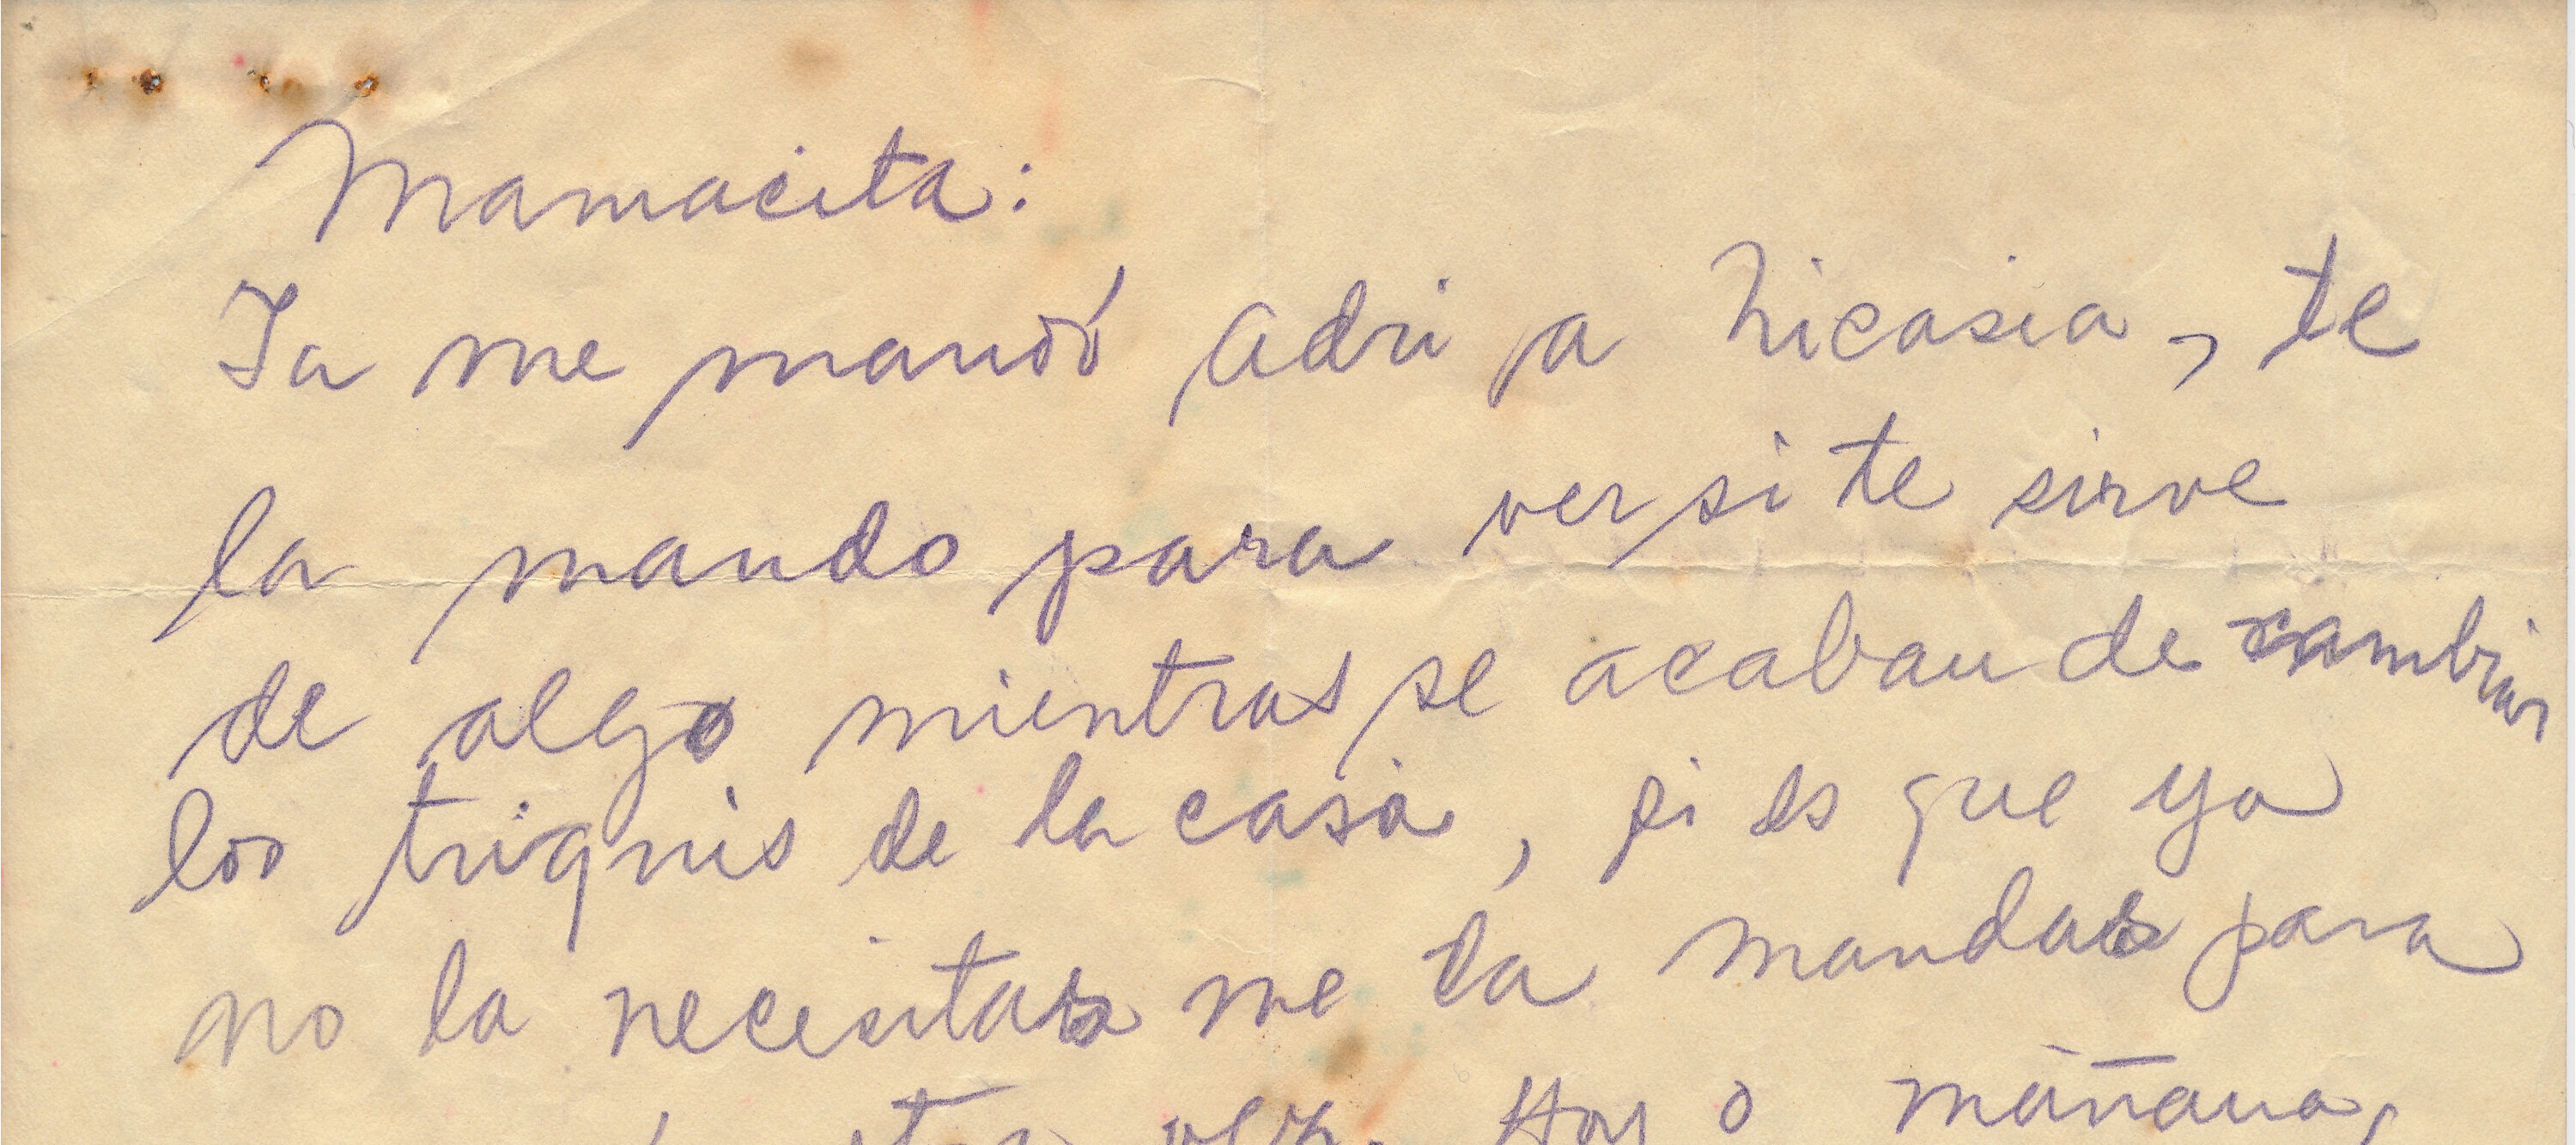 A handwritten letter by Frida Kahlo in Spanish on a piece of tan colored paper that is torn in half.